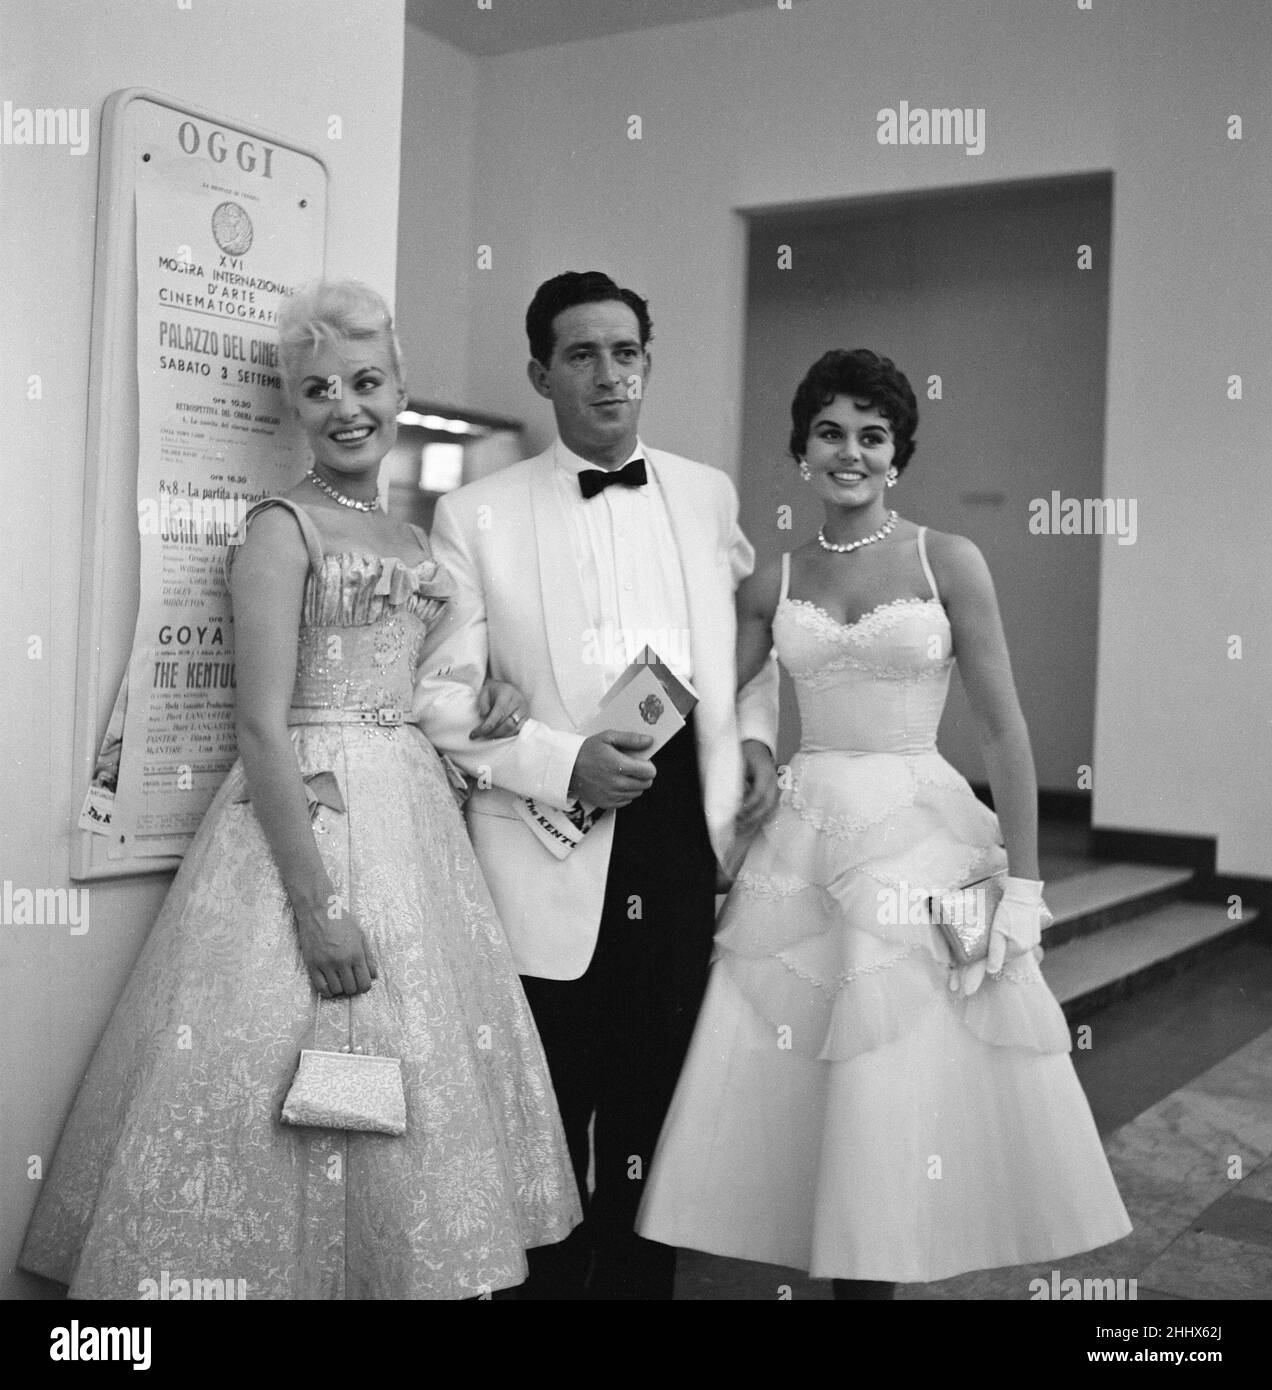 Venice Film Festival 1955, British actors (l-r) Belinda Lee, John Gregson and Eunice Gayson attend a party for The Kentuckian, Sunday 4th September 1955. Stock Photo